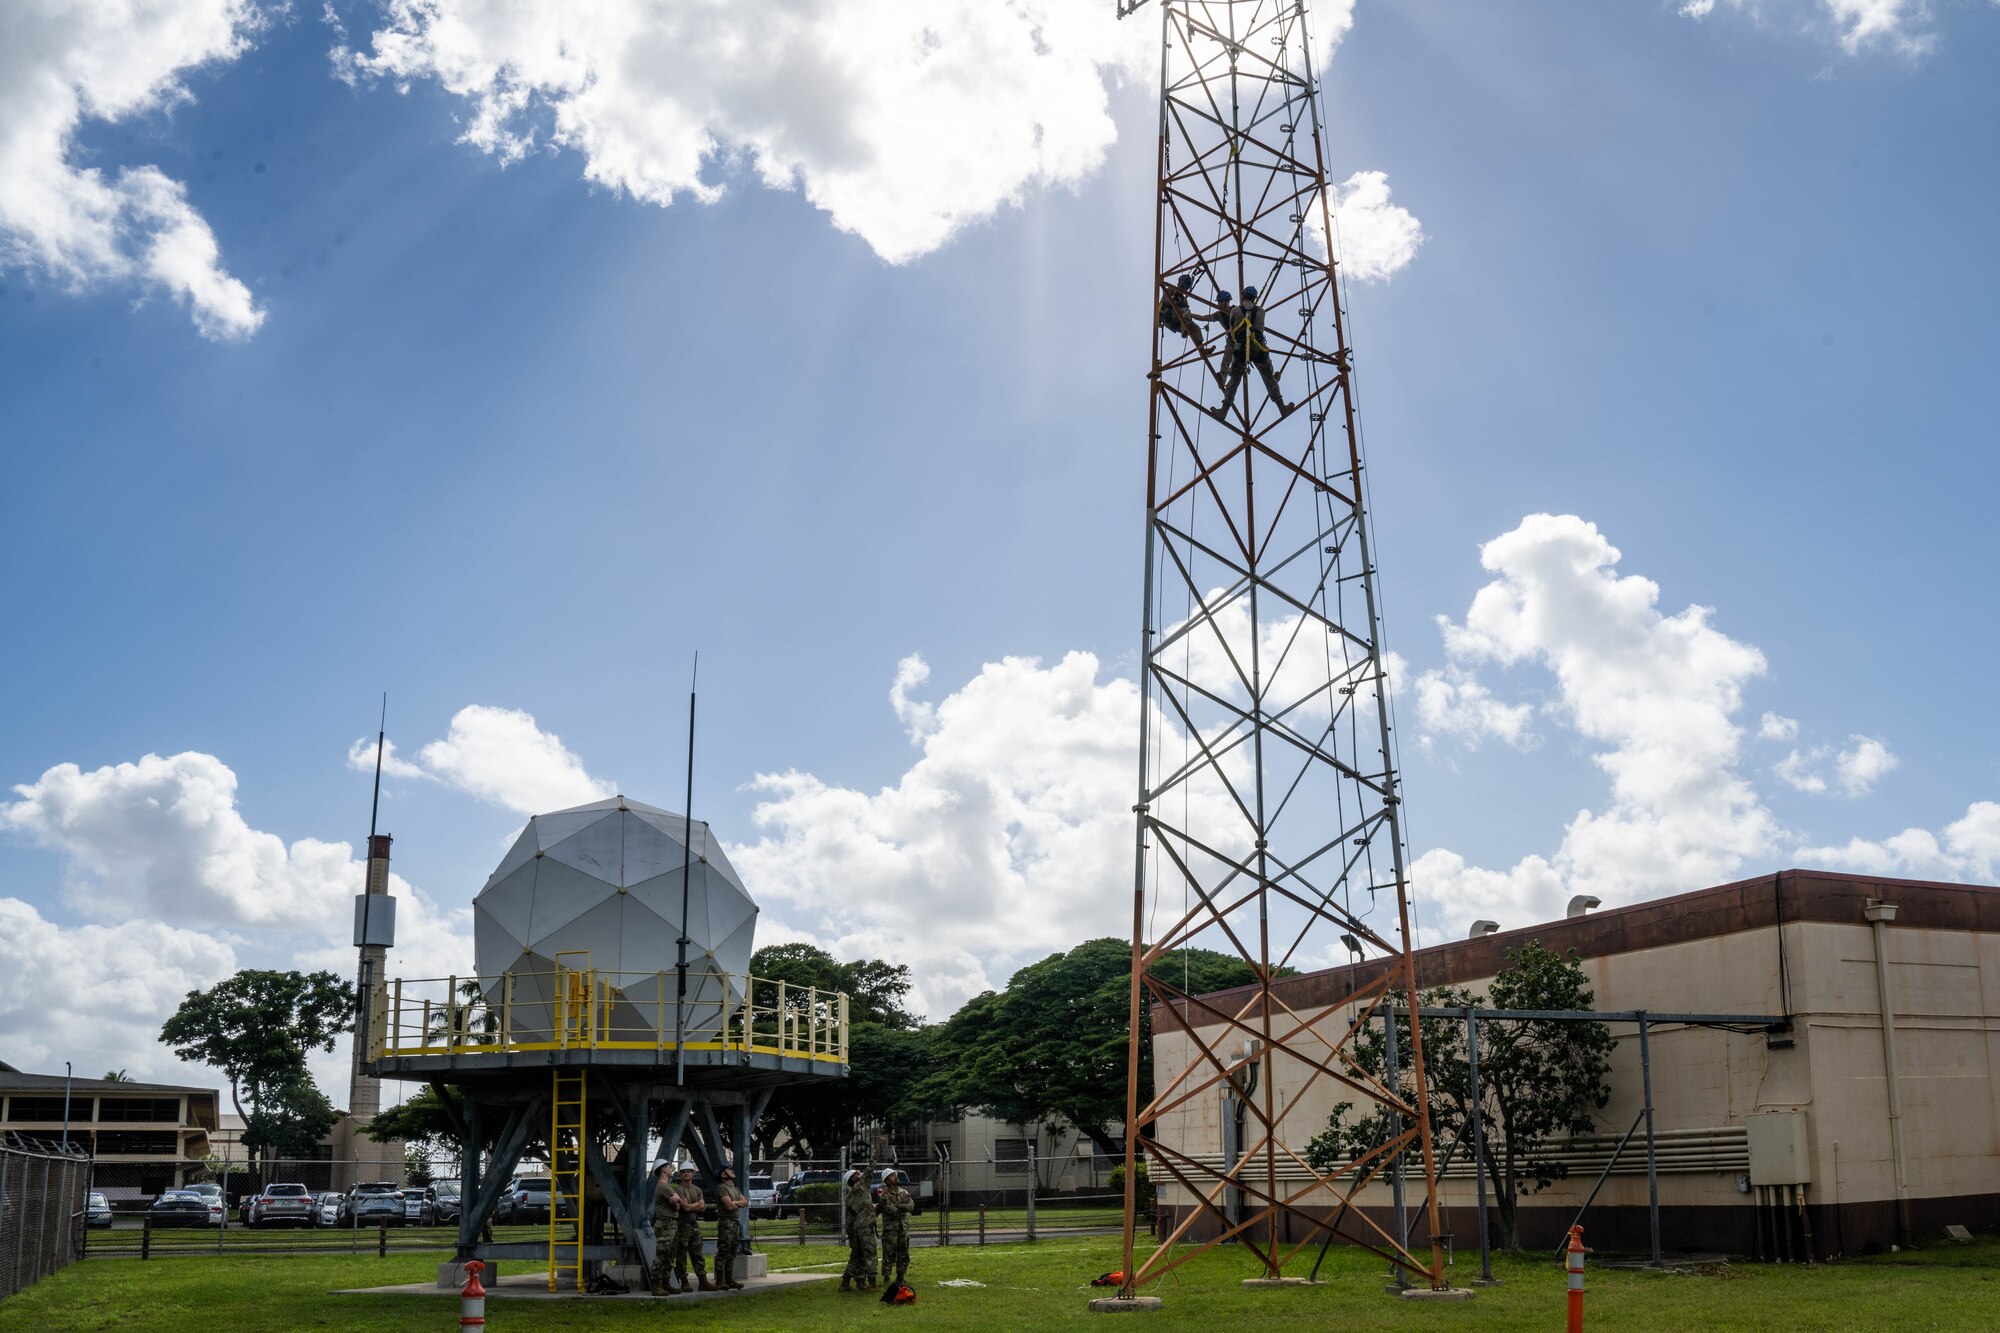 Airmen from the 747th Cyber Security Squadron complete a climbing certification class at Joint Base Pearl Harbor-Hickam, Hawaii, Jan. 11, 2024. Cyber airmen conduct routine maintenance to the towers supporting the Joint Base and are responsible for keeping the Internet and phone communications running. (U.S. Air Force photo by Senior Airman Makensie Cooper)